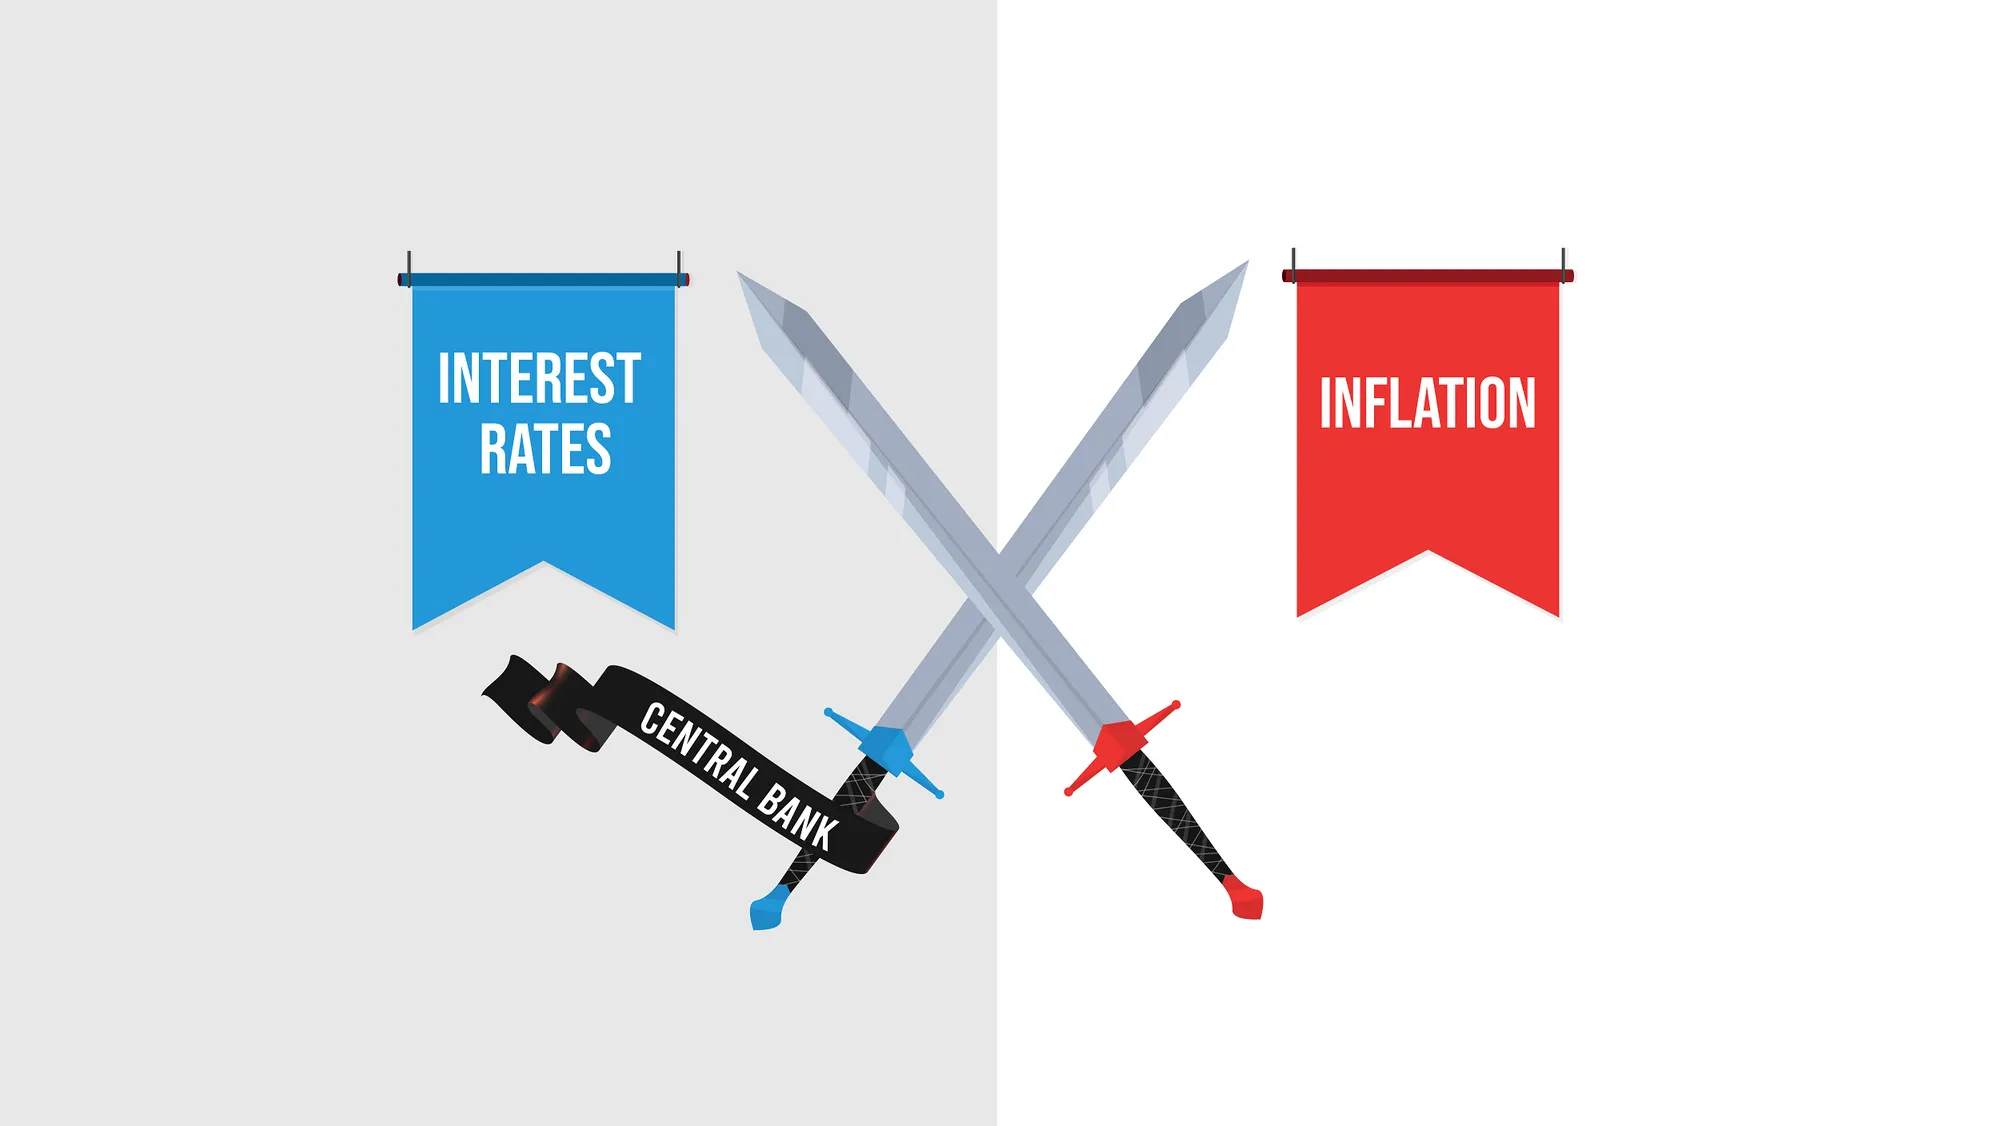 Central Bank Interest Rates And Inflation: Taming the Inflation Beast or Fueling the Fire?